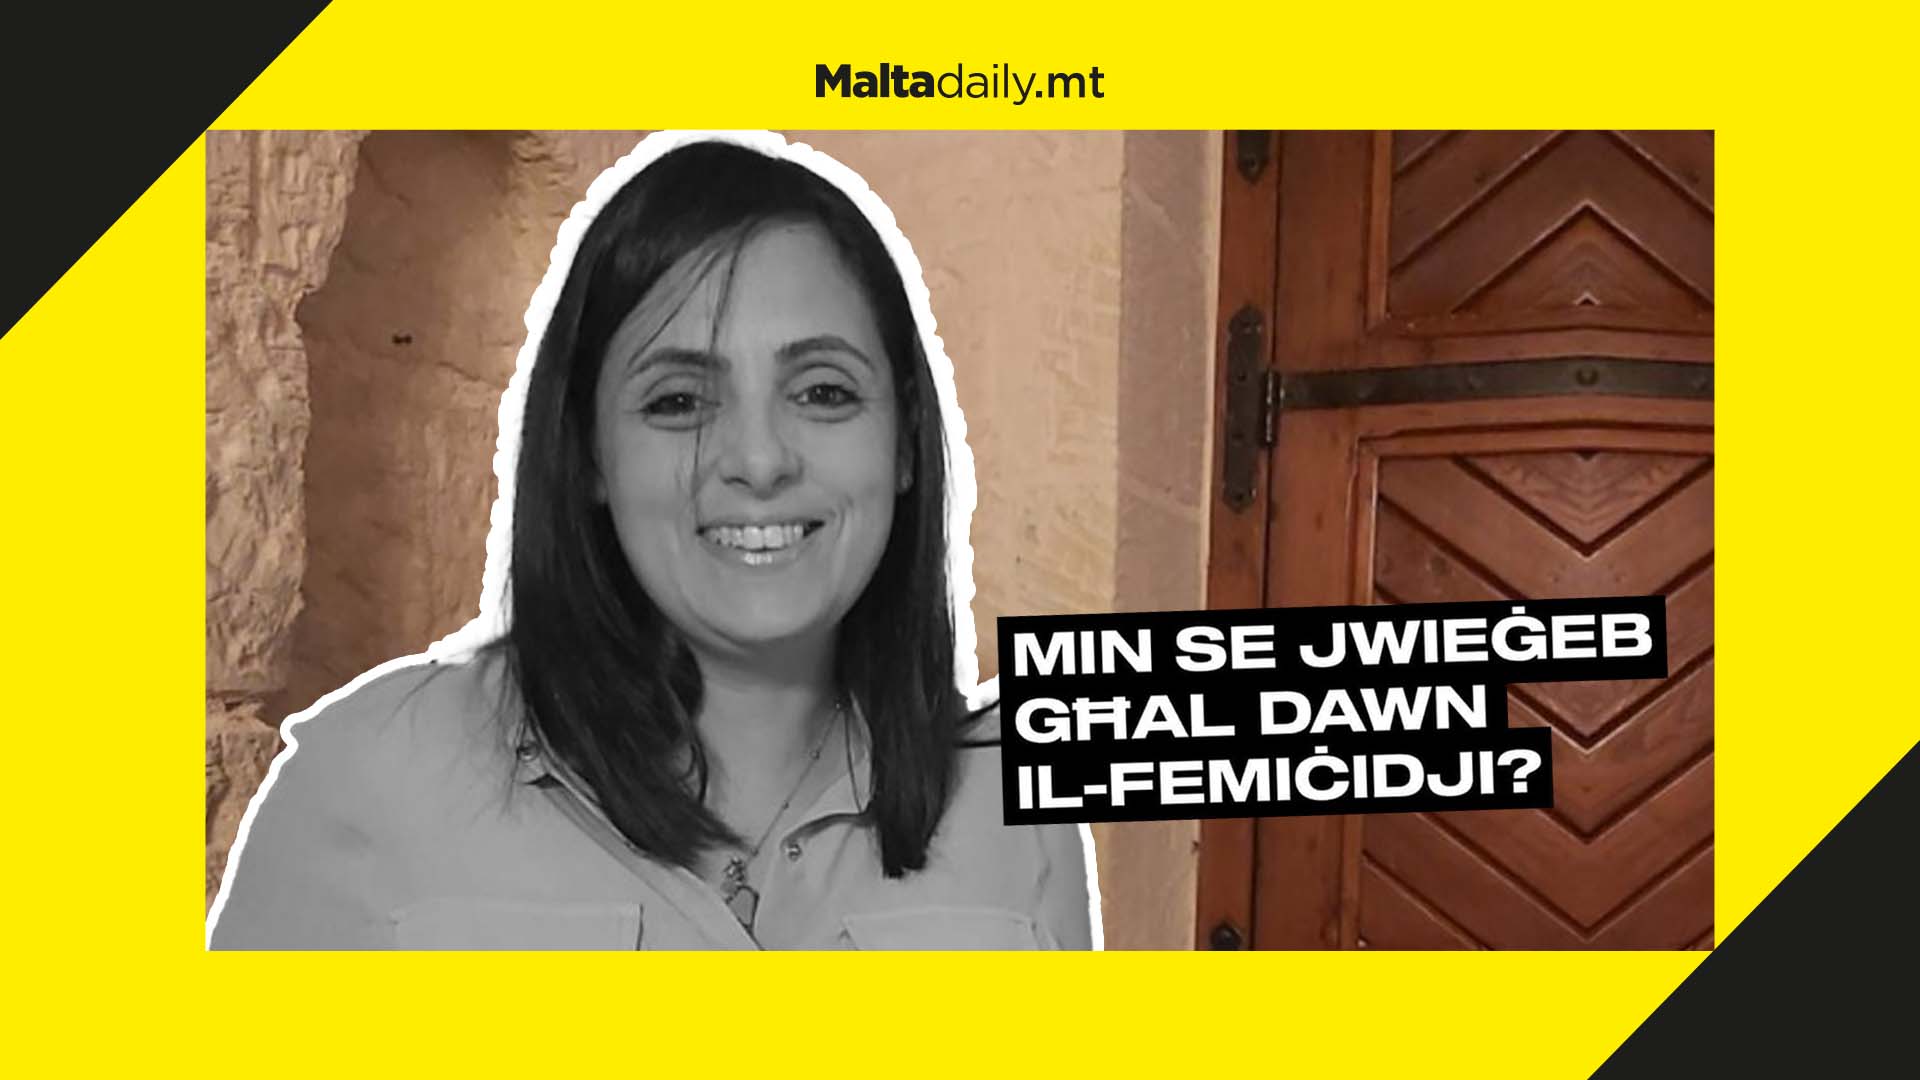 Maltese activists to protest outside police headquarter to call for responsibility on femicides